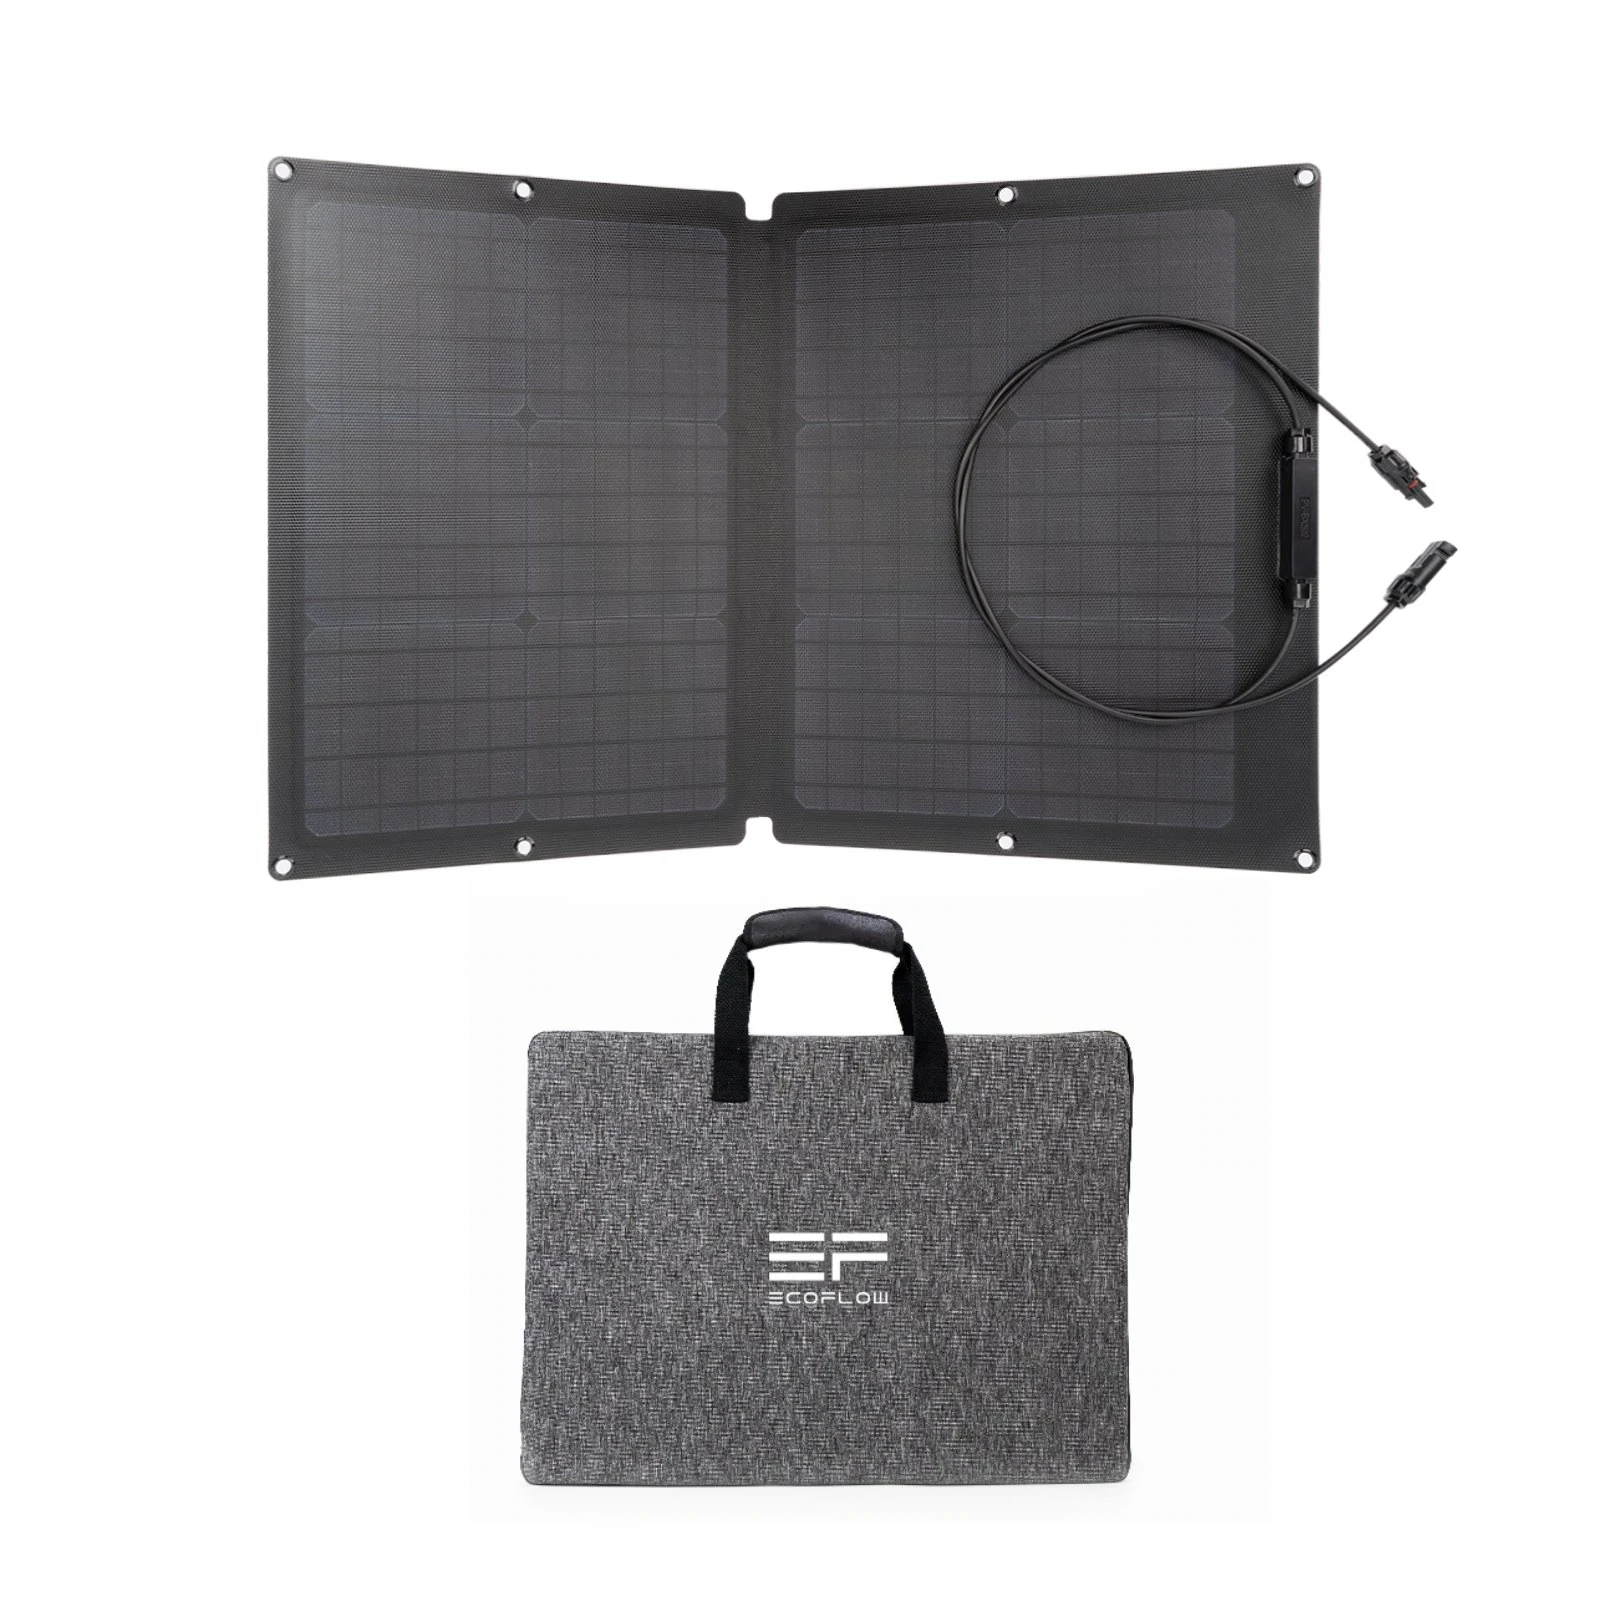 Find US Direct EcoFlow 60W Solar Panel 21 6V 3 5A Portable Foldable IP67 Waterproof Solar Panel 21 32 1 1 0 in 53 7 81 5 2 4 cm for Sale on Gipsybee.com with cryptocurrencies